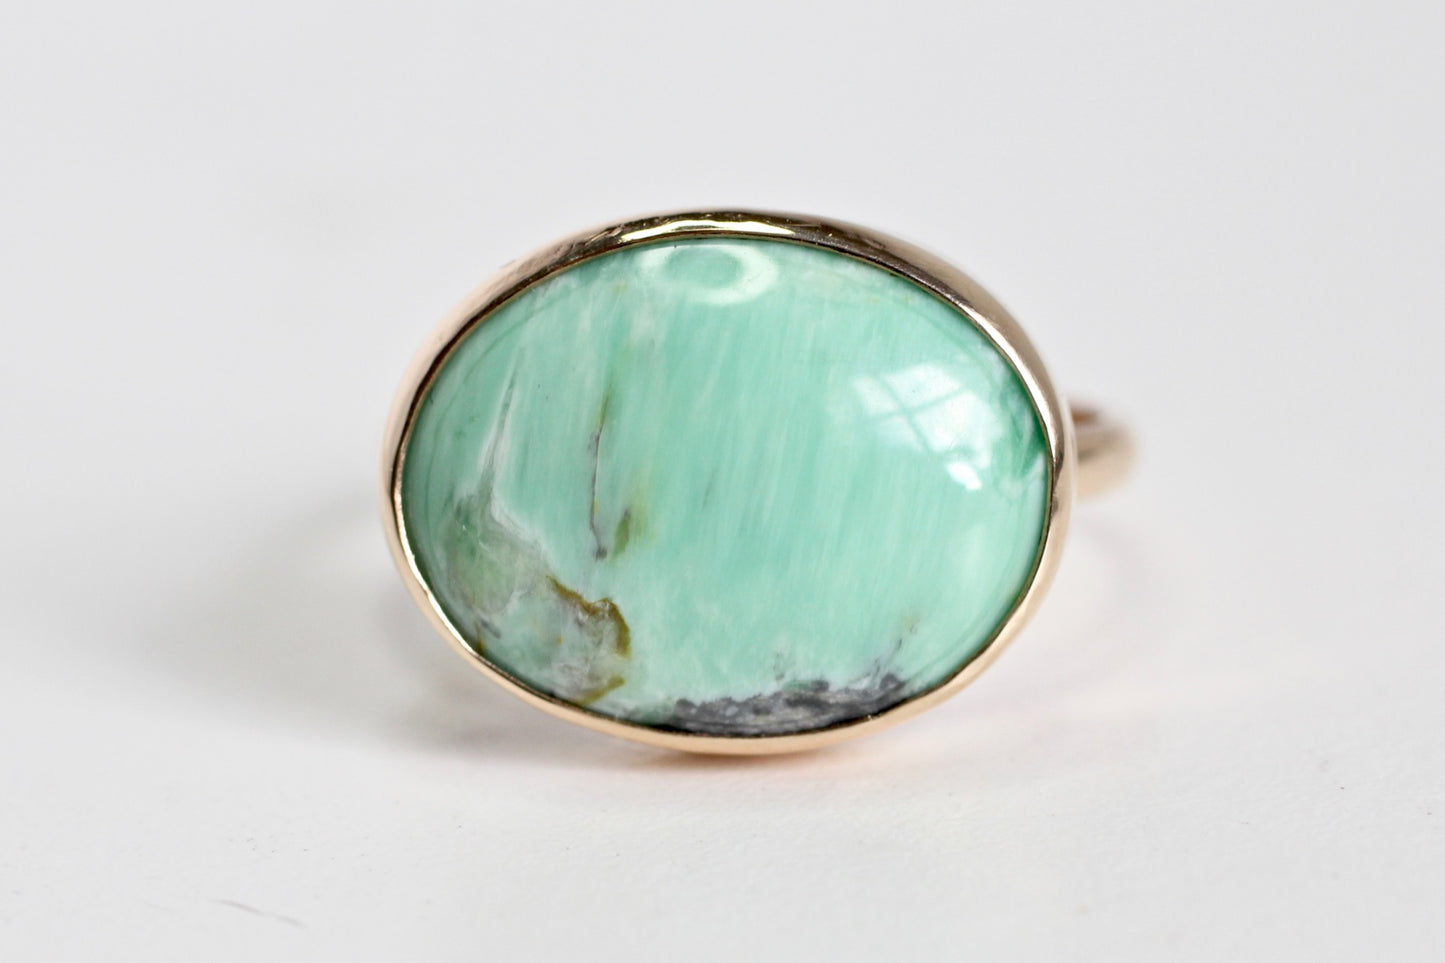 Oval Variscite Ring in Recycled 14k Gold